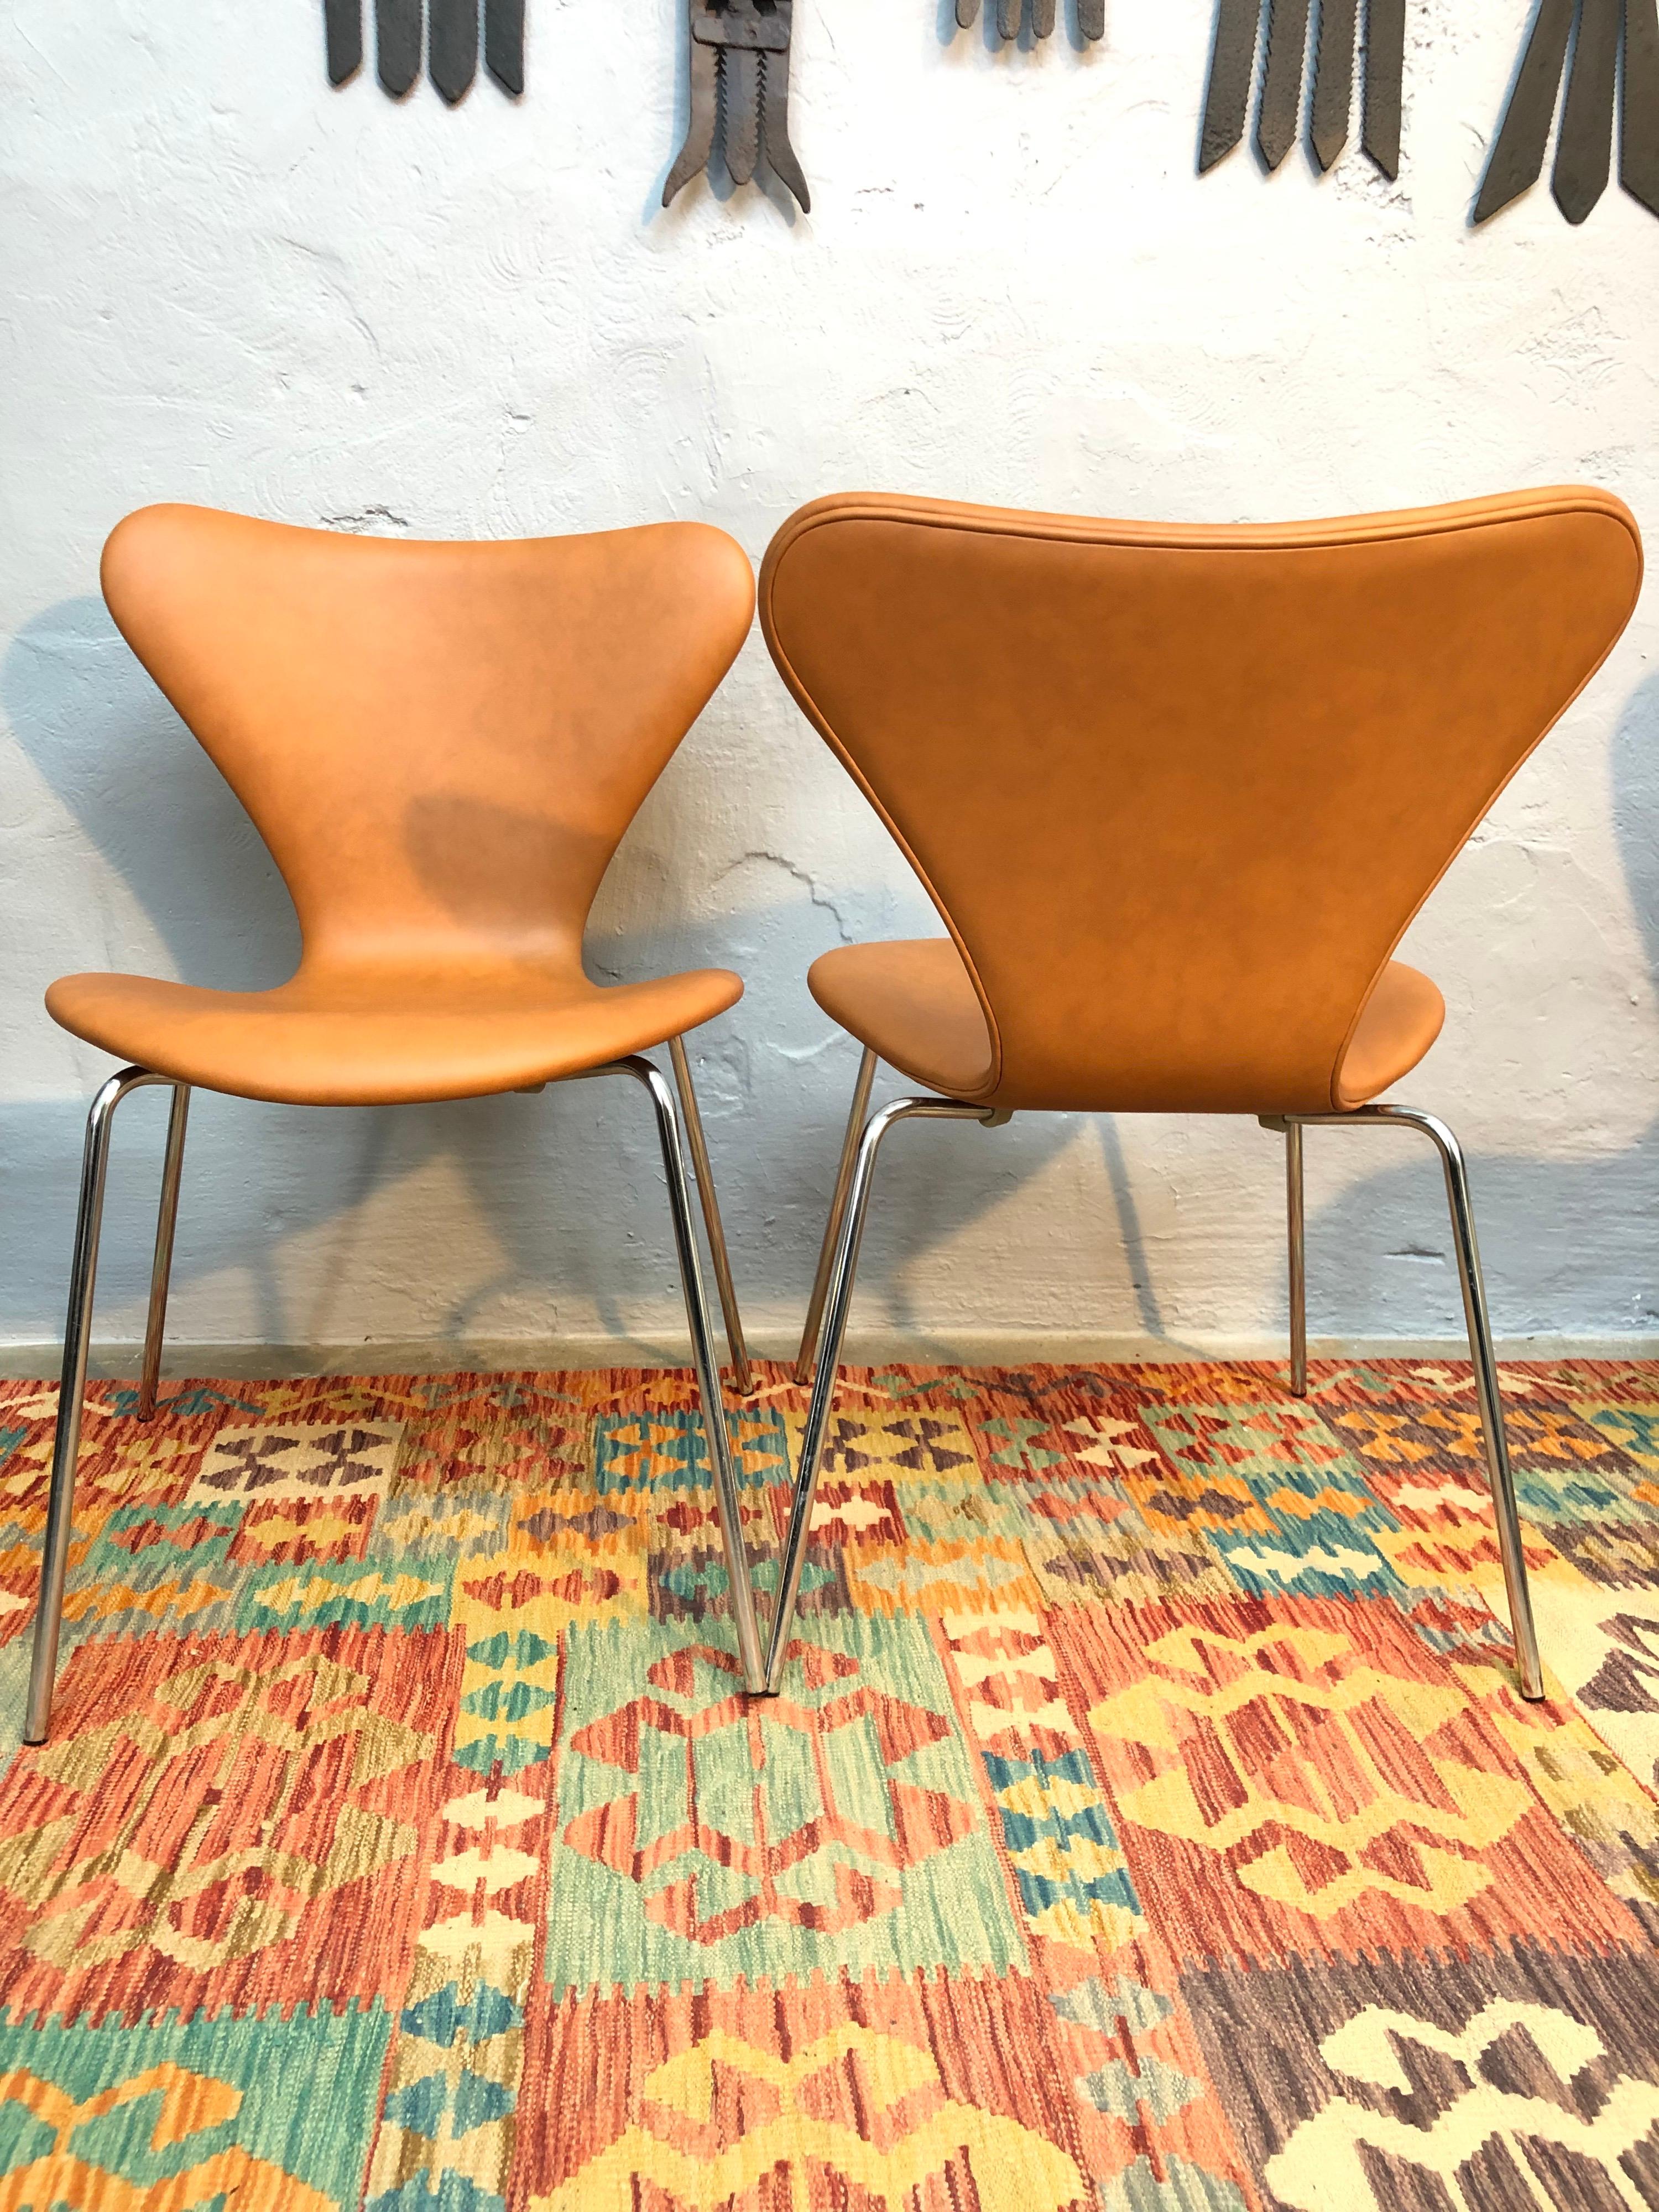 6 Vintage Iconic Chairs by Arne Jacobsen for Fritz Hansen in Leather 11